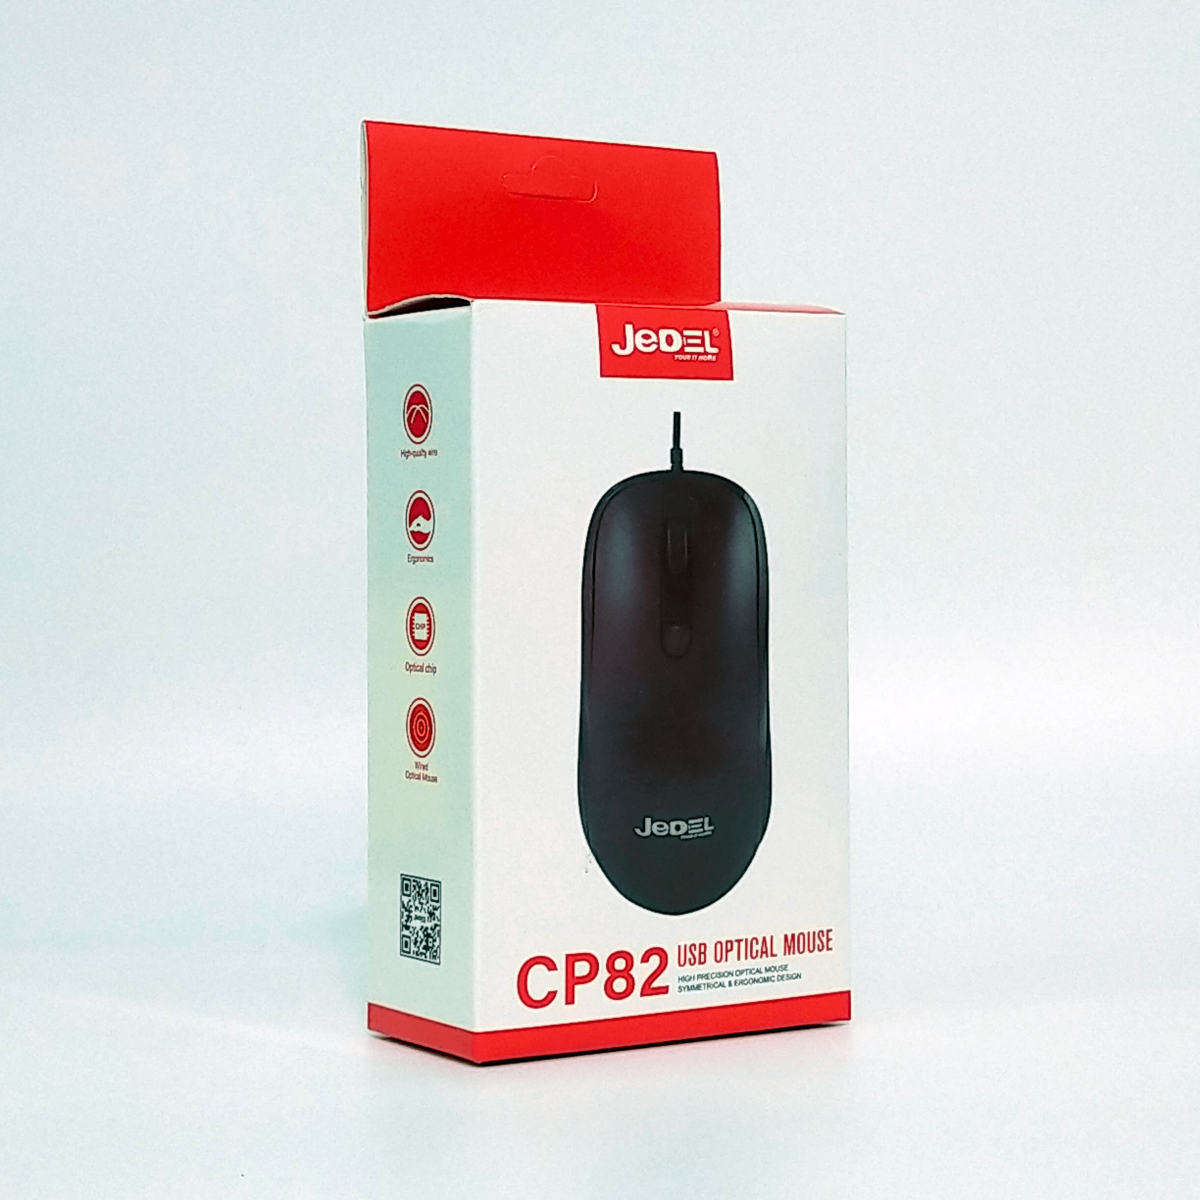 JEDEL USB MOUSE CP82